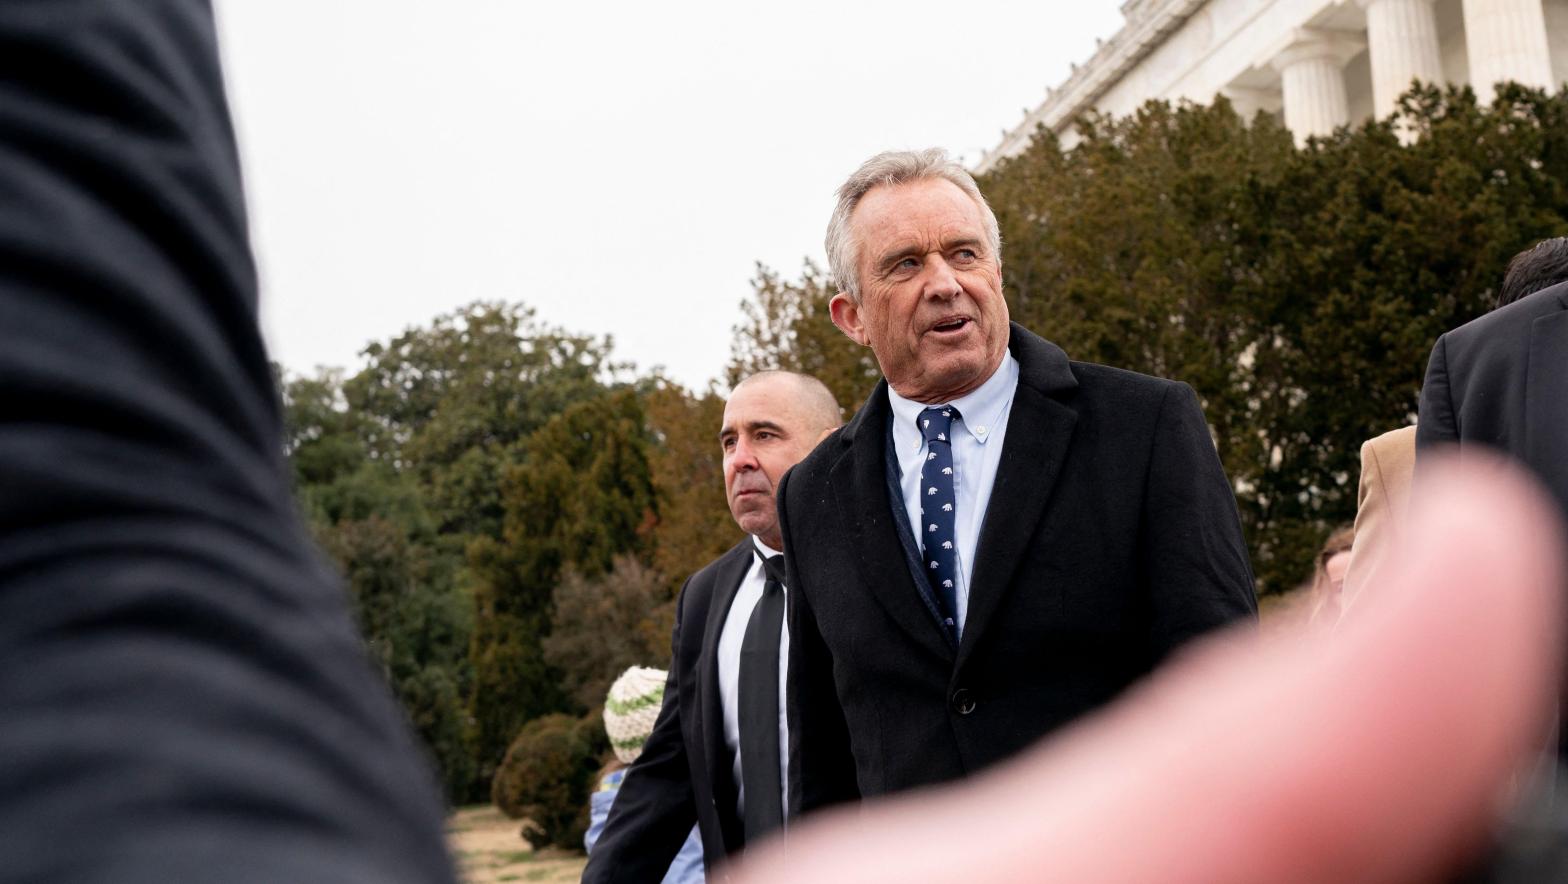 Robert F. Kennedy Jr. is one of the world's leading vaccine conspiracists, though he's finding he has less and less platforms to spread his organisation's disinformation. (Photo: STEFANI REYNOLDS/AFP, Getty Images)